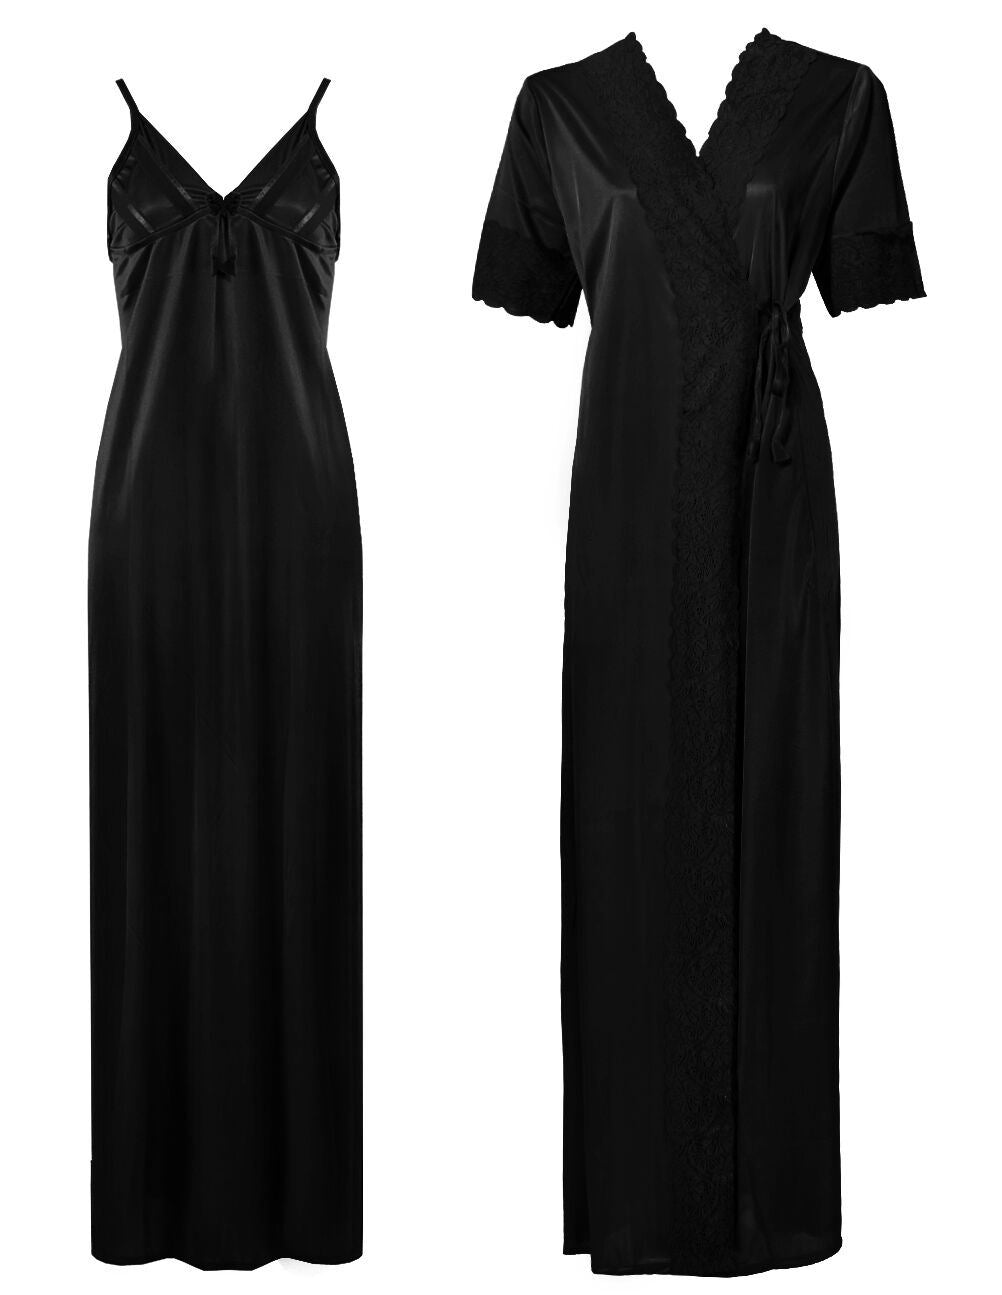 Black / One Size: Regular (8-14) Satin Strappy Long Nighty With Dressing Gown / Robe The Orange Tags